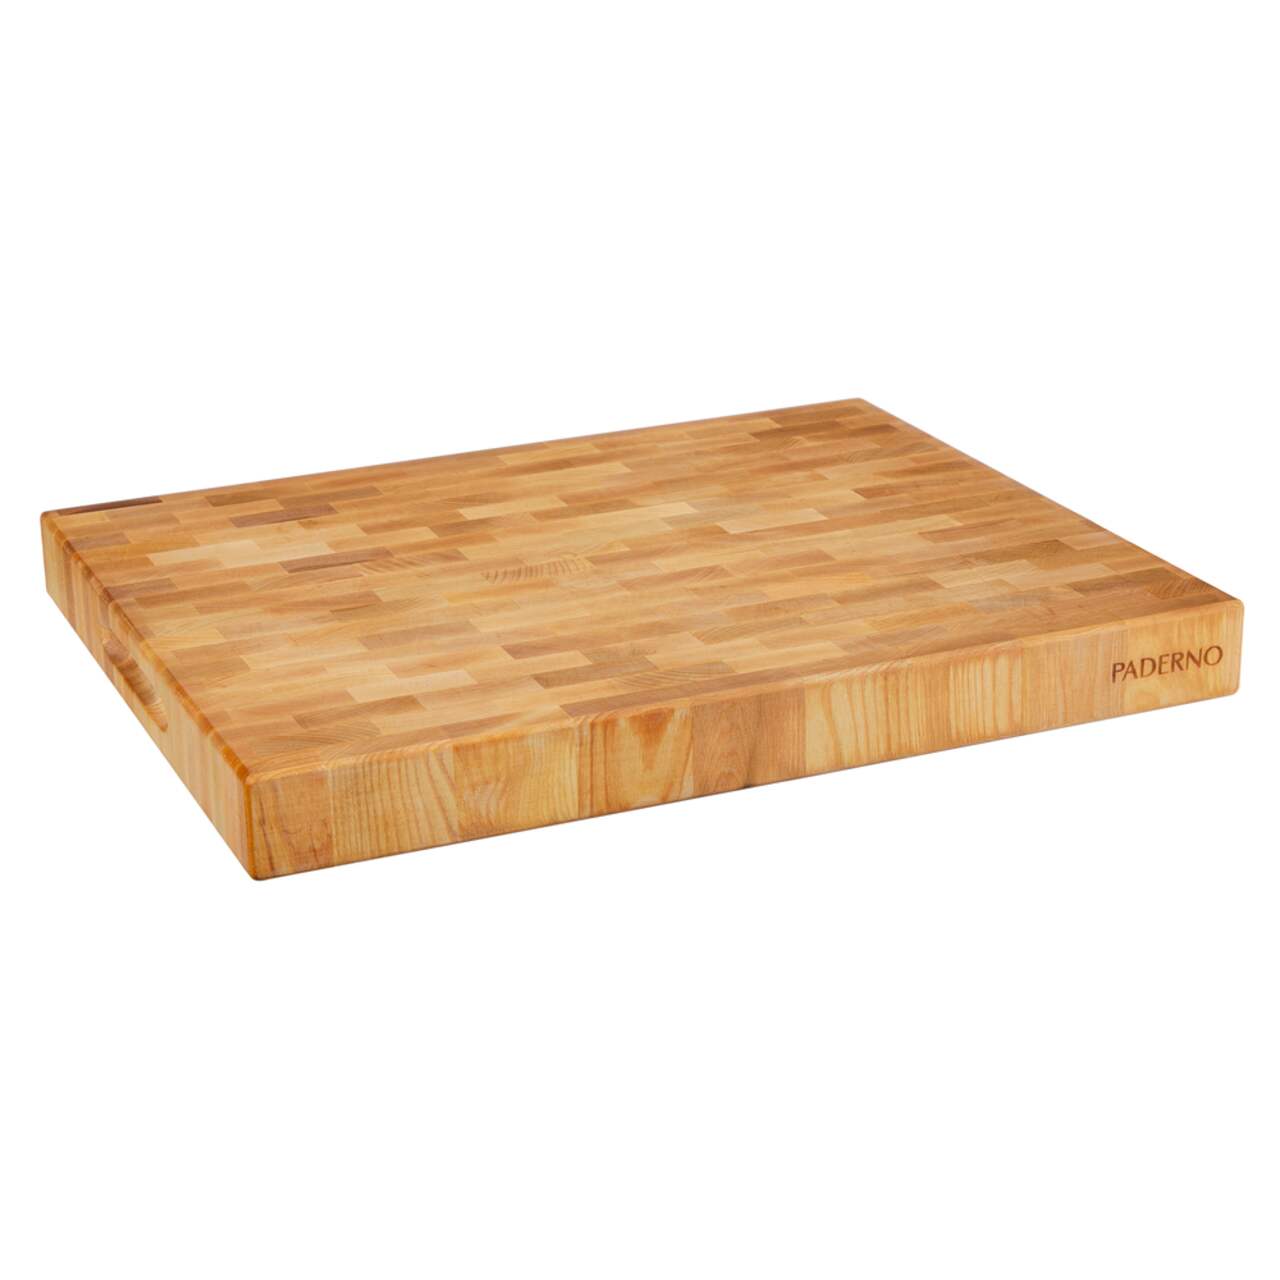 https://media-www.canadiantire.ca/product/living/kitchen/cutlery/1429358/paderno-butcher-block-f7dff42e-dfb4-4ec1-9944-2b9a478d0c42.png?imdensity=1&imwidth=1244&impolicy=mZoom